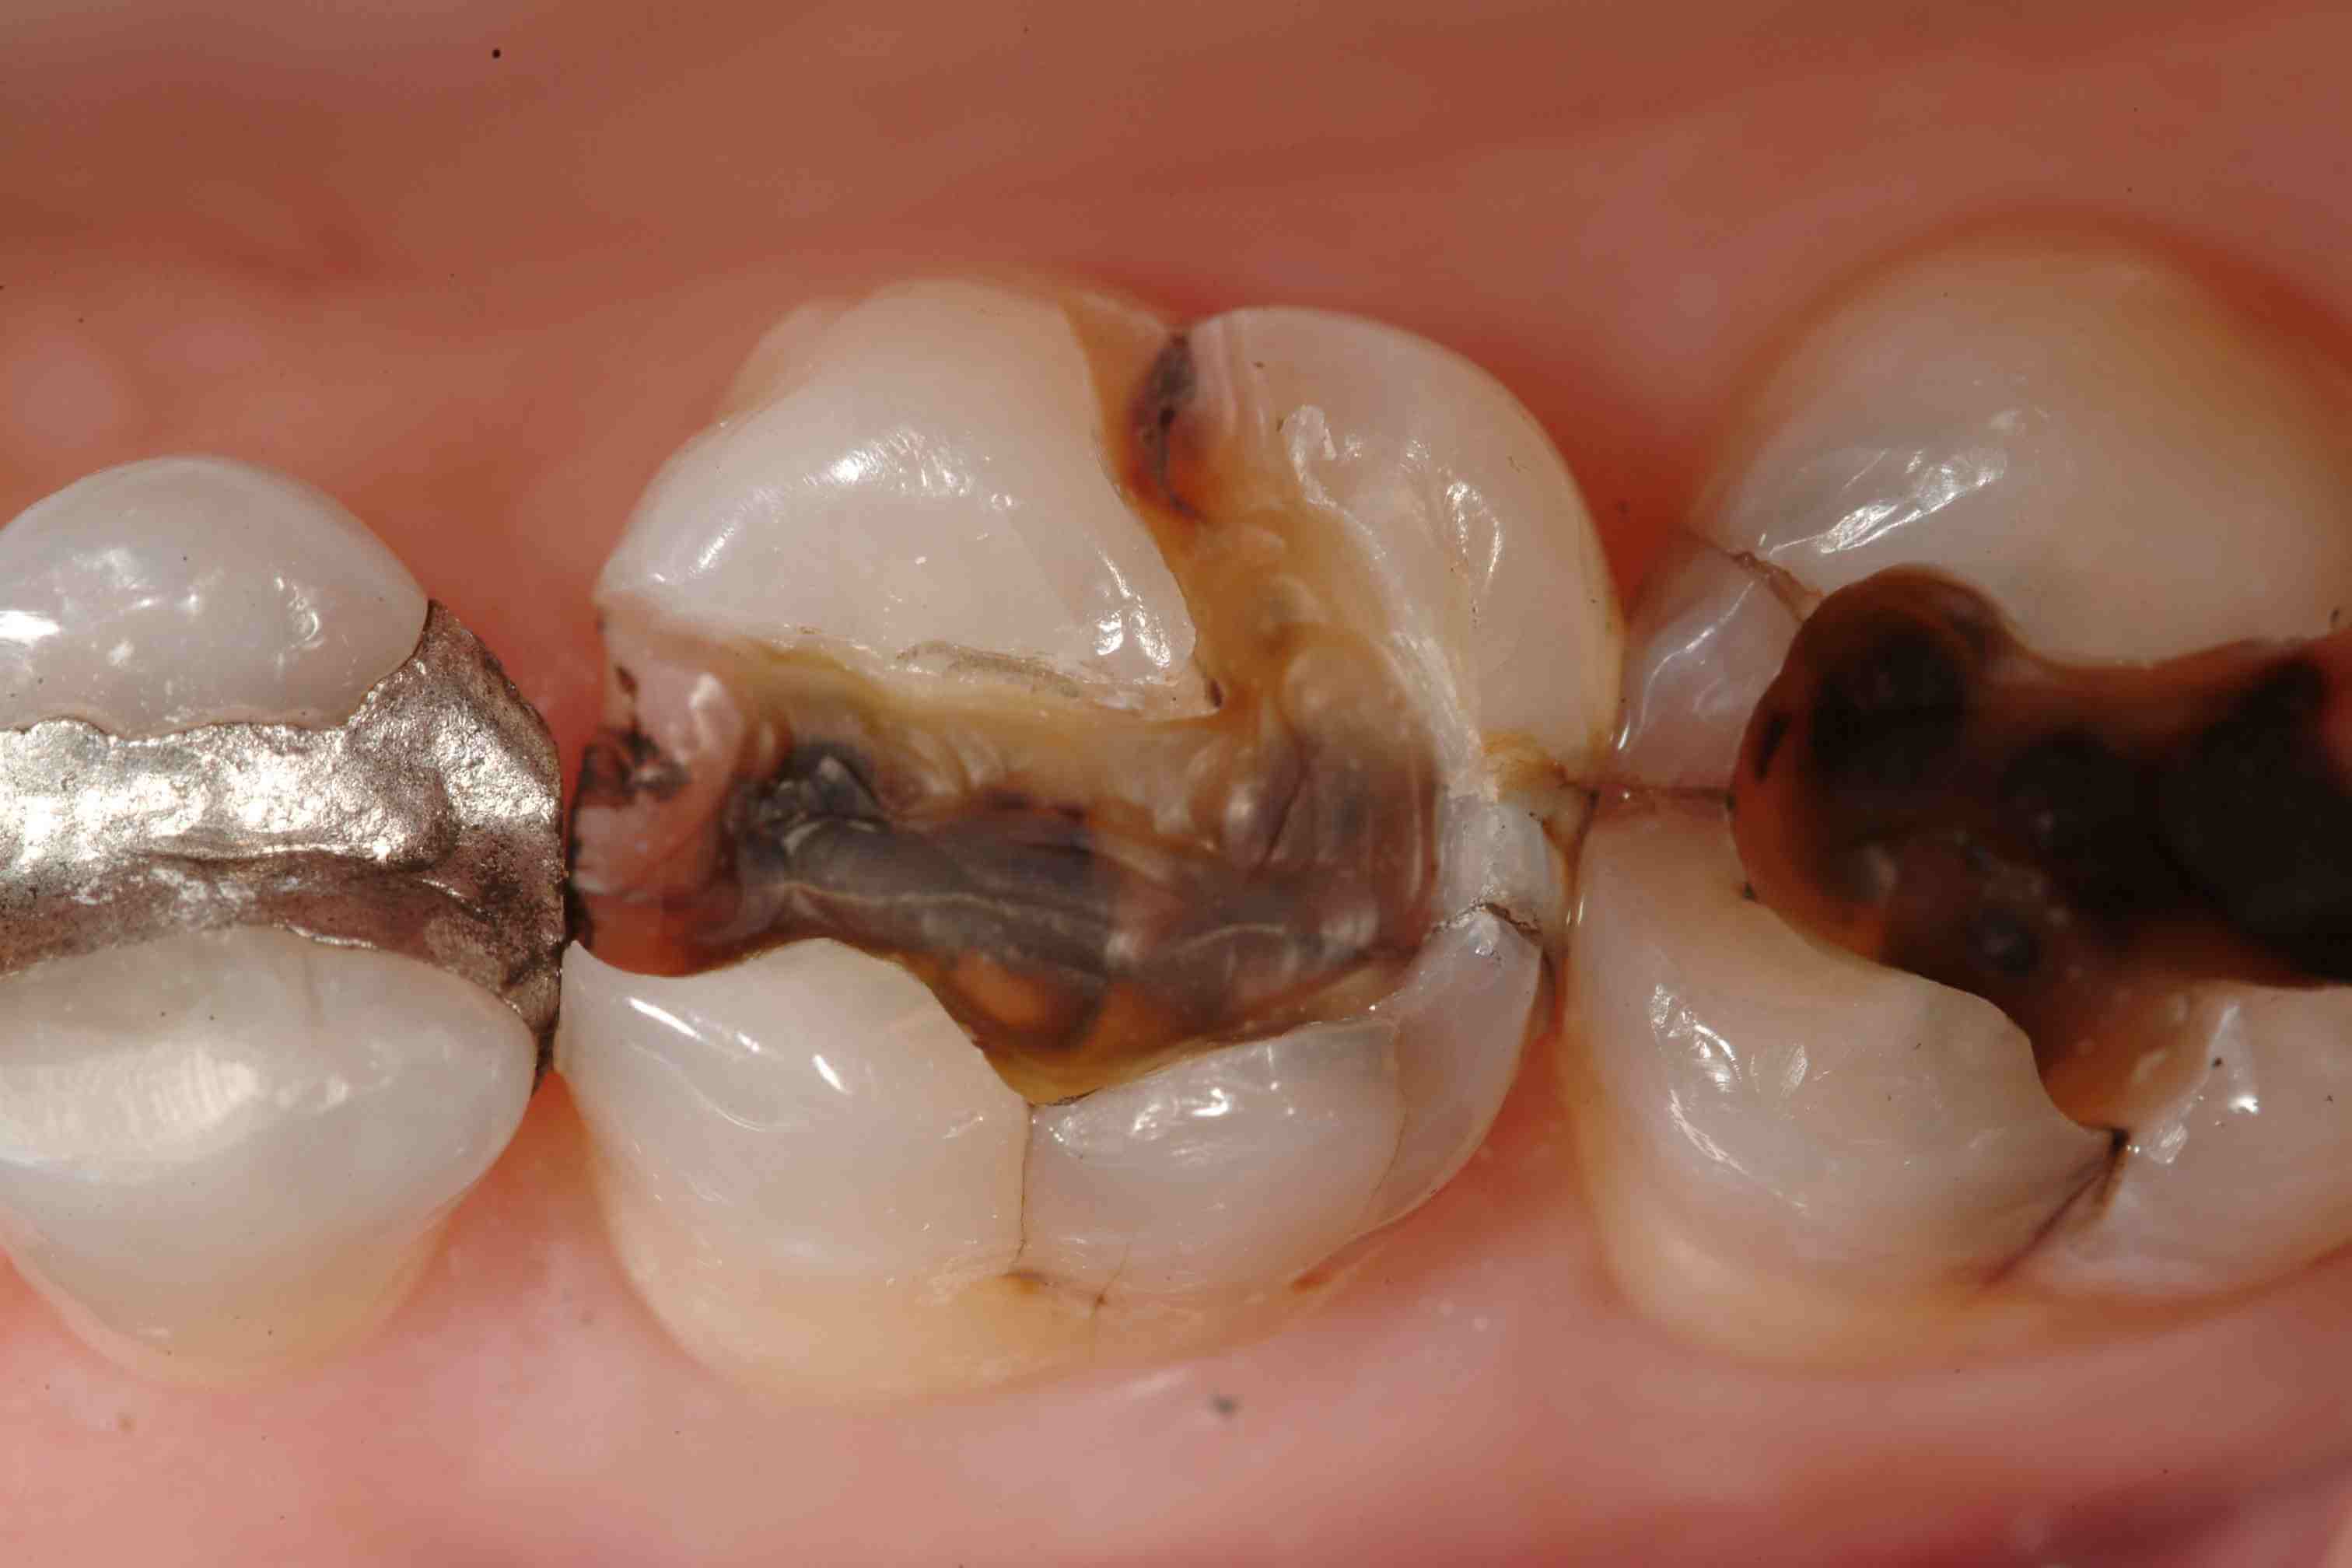 Article about Cracked tooth: Types, causes, and treatments